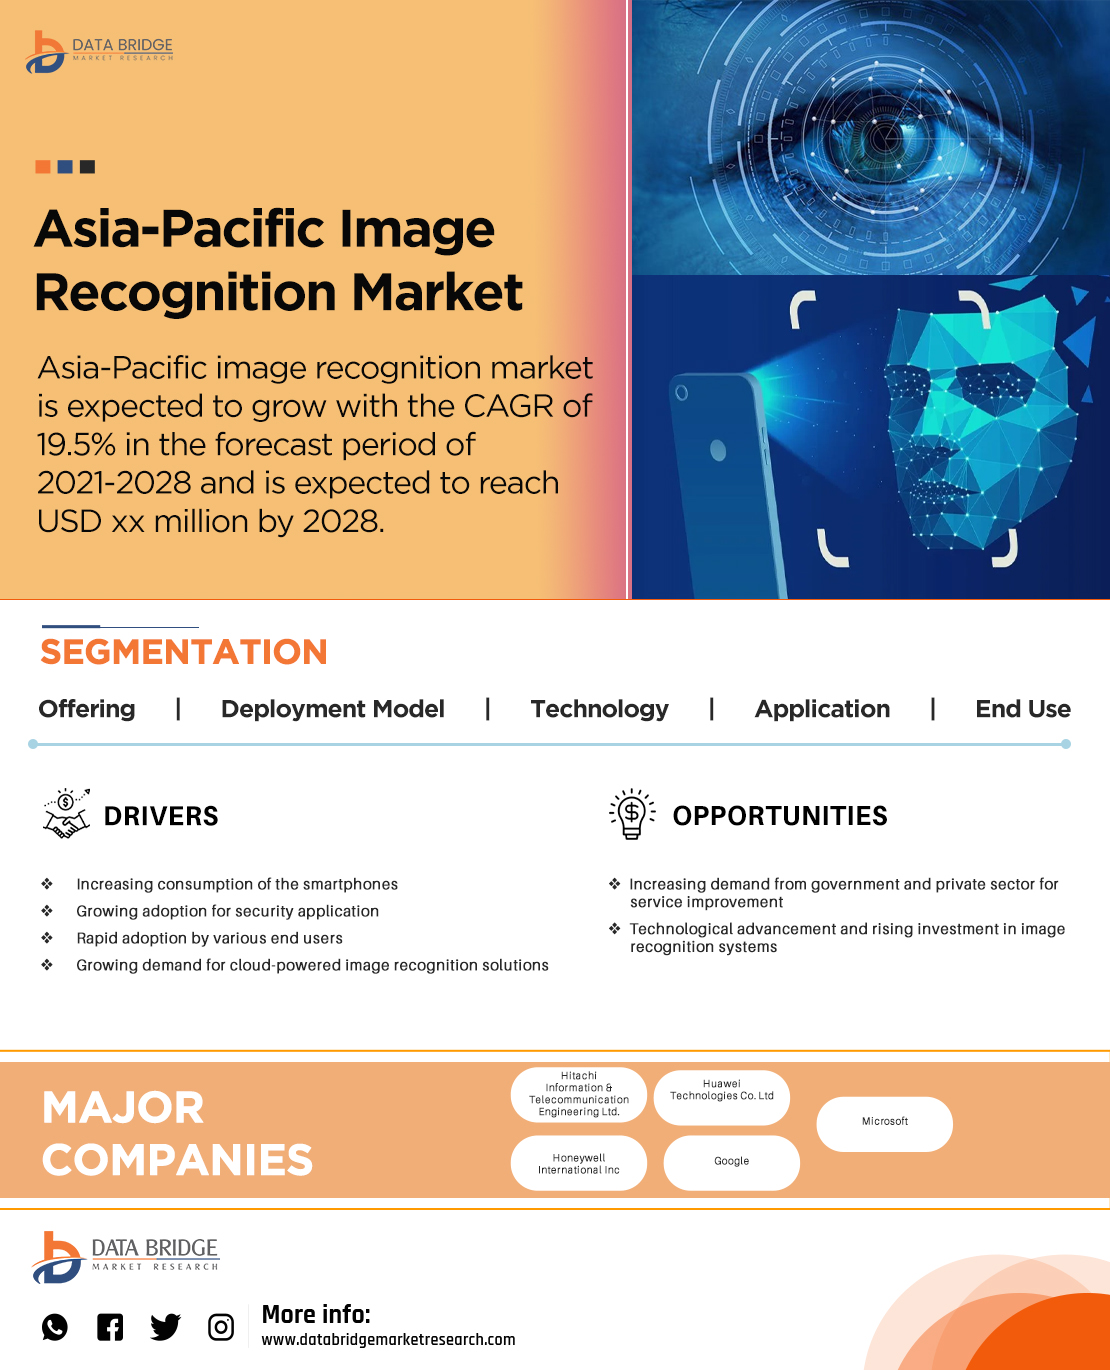 Asia-Pacific Image Recognition Market